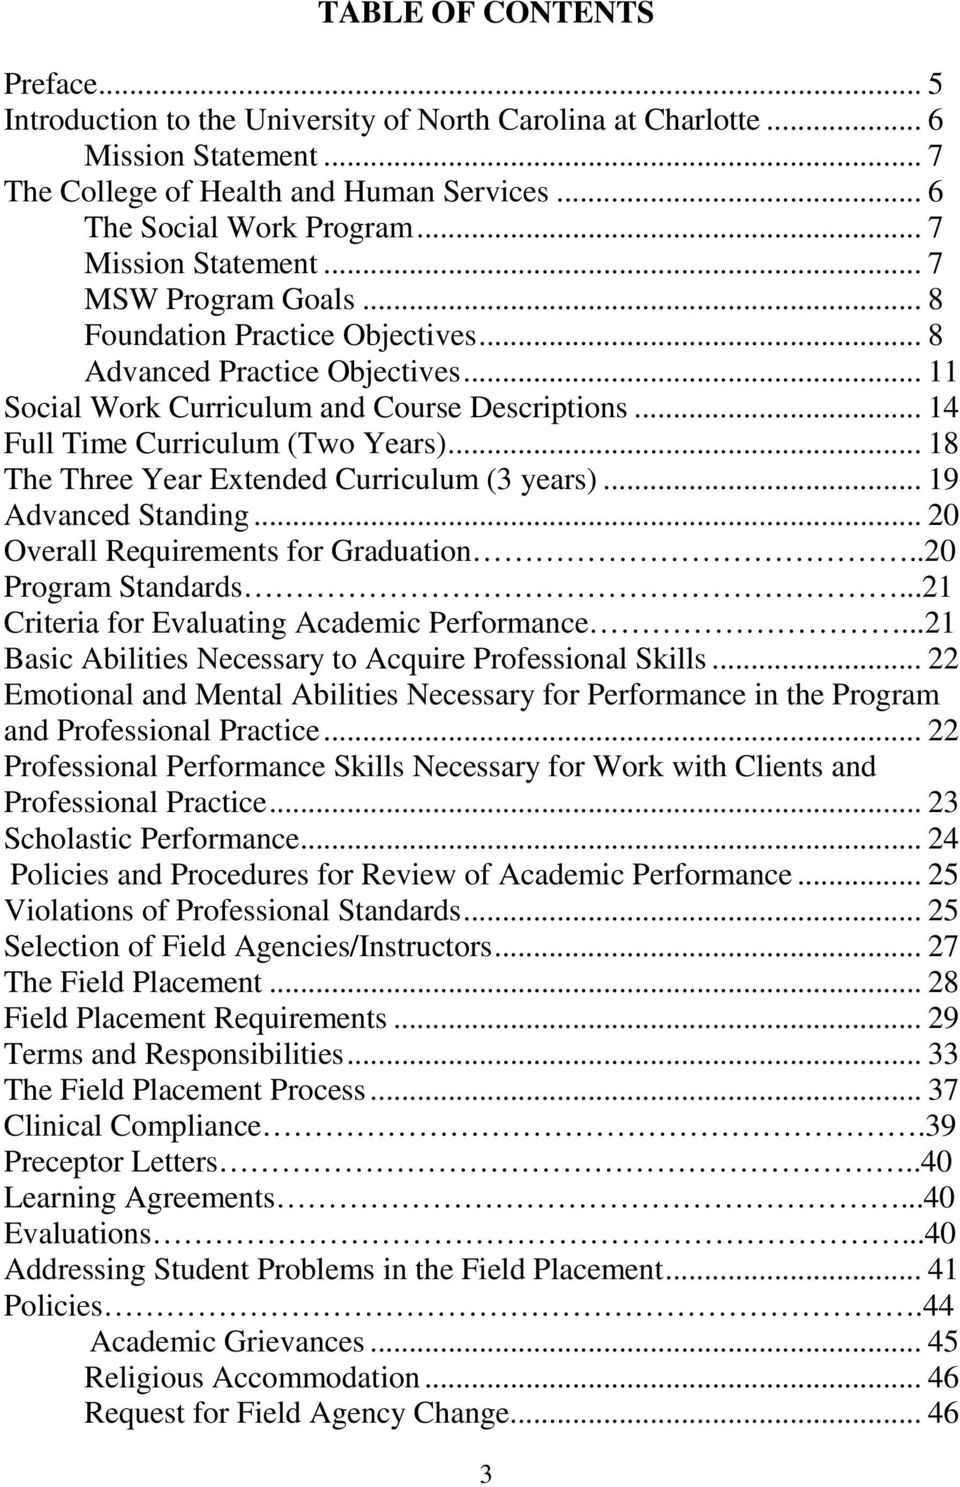 .. 14 Full Time Curriculum (Two Years)... 18 The Three Year Extended Curriculum (3 years)... 19 Advanced Standing... 20 Overall Requirements for Graduation..20 Program Standards.